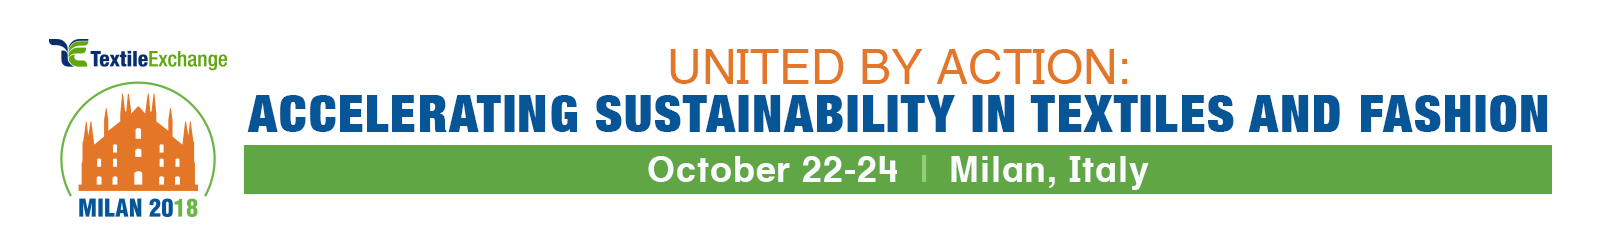 2018 Textile Sustainability Conference 